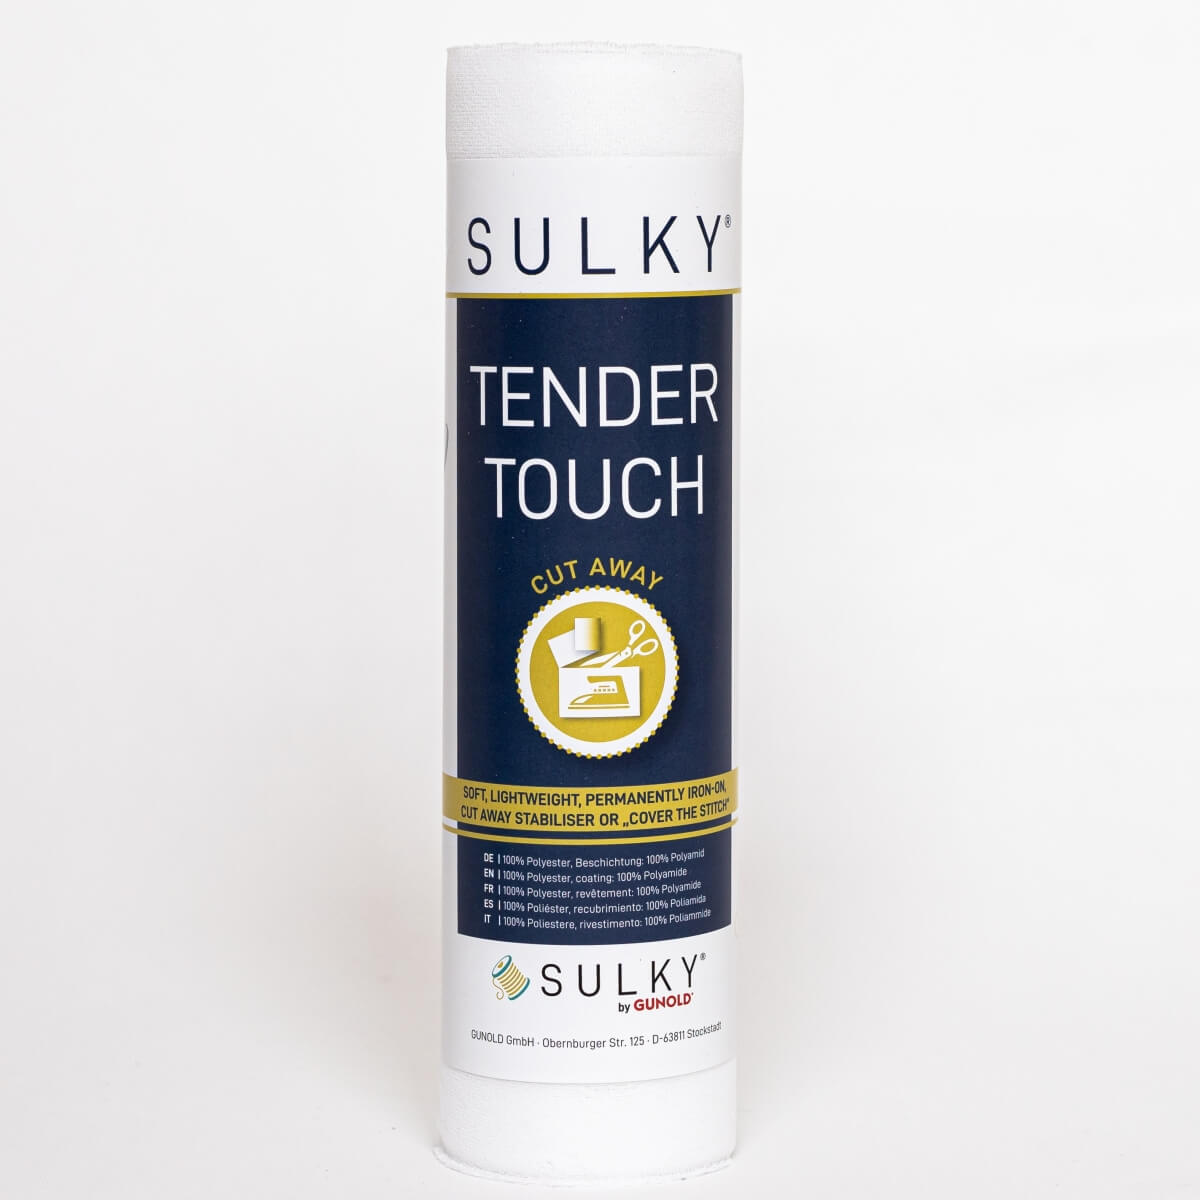 SULKY TENDER TOUCH white, 25cm x 5m